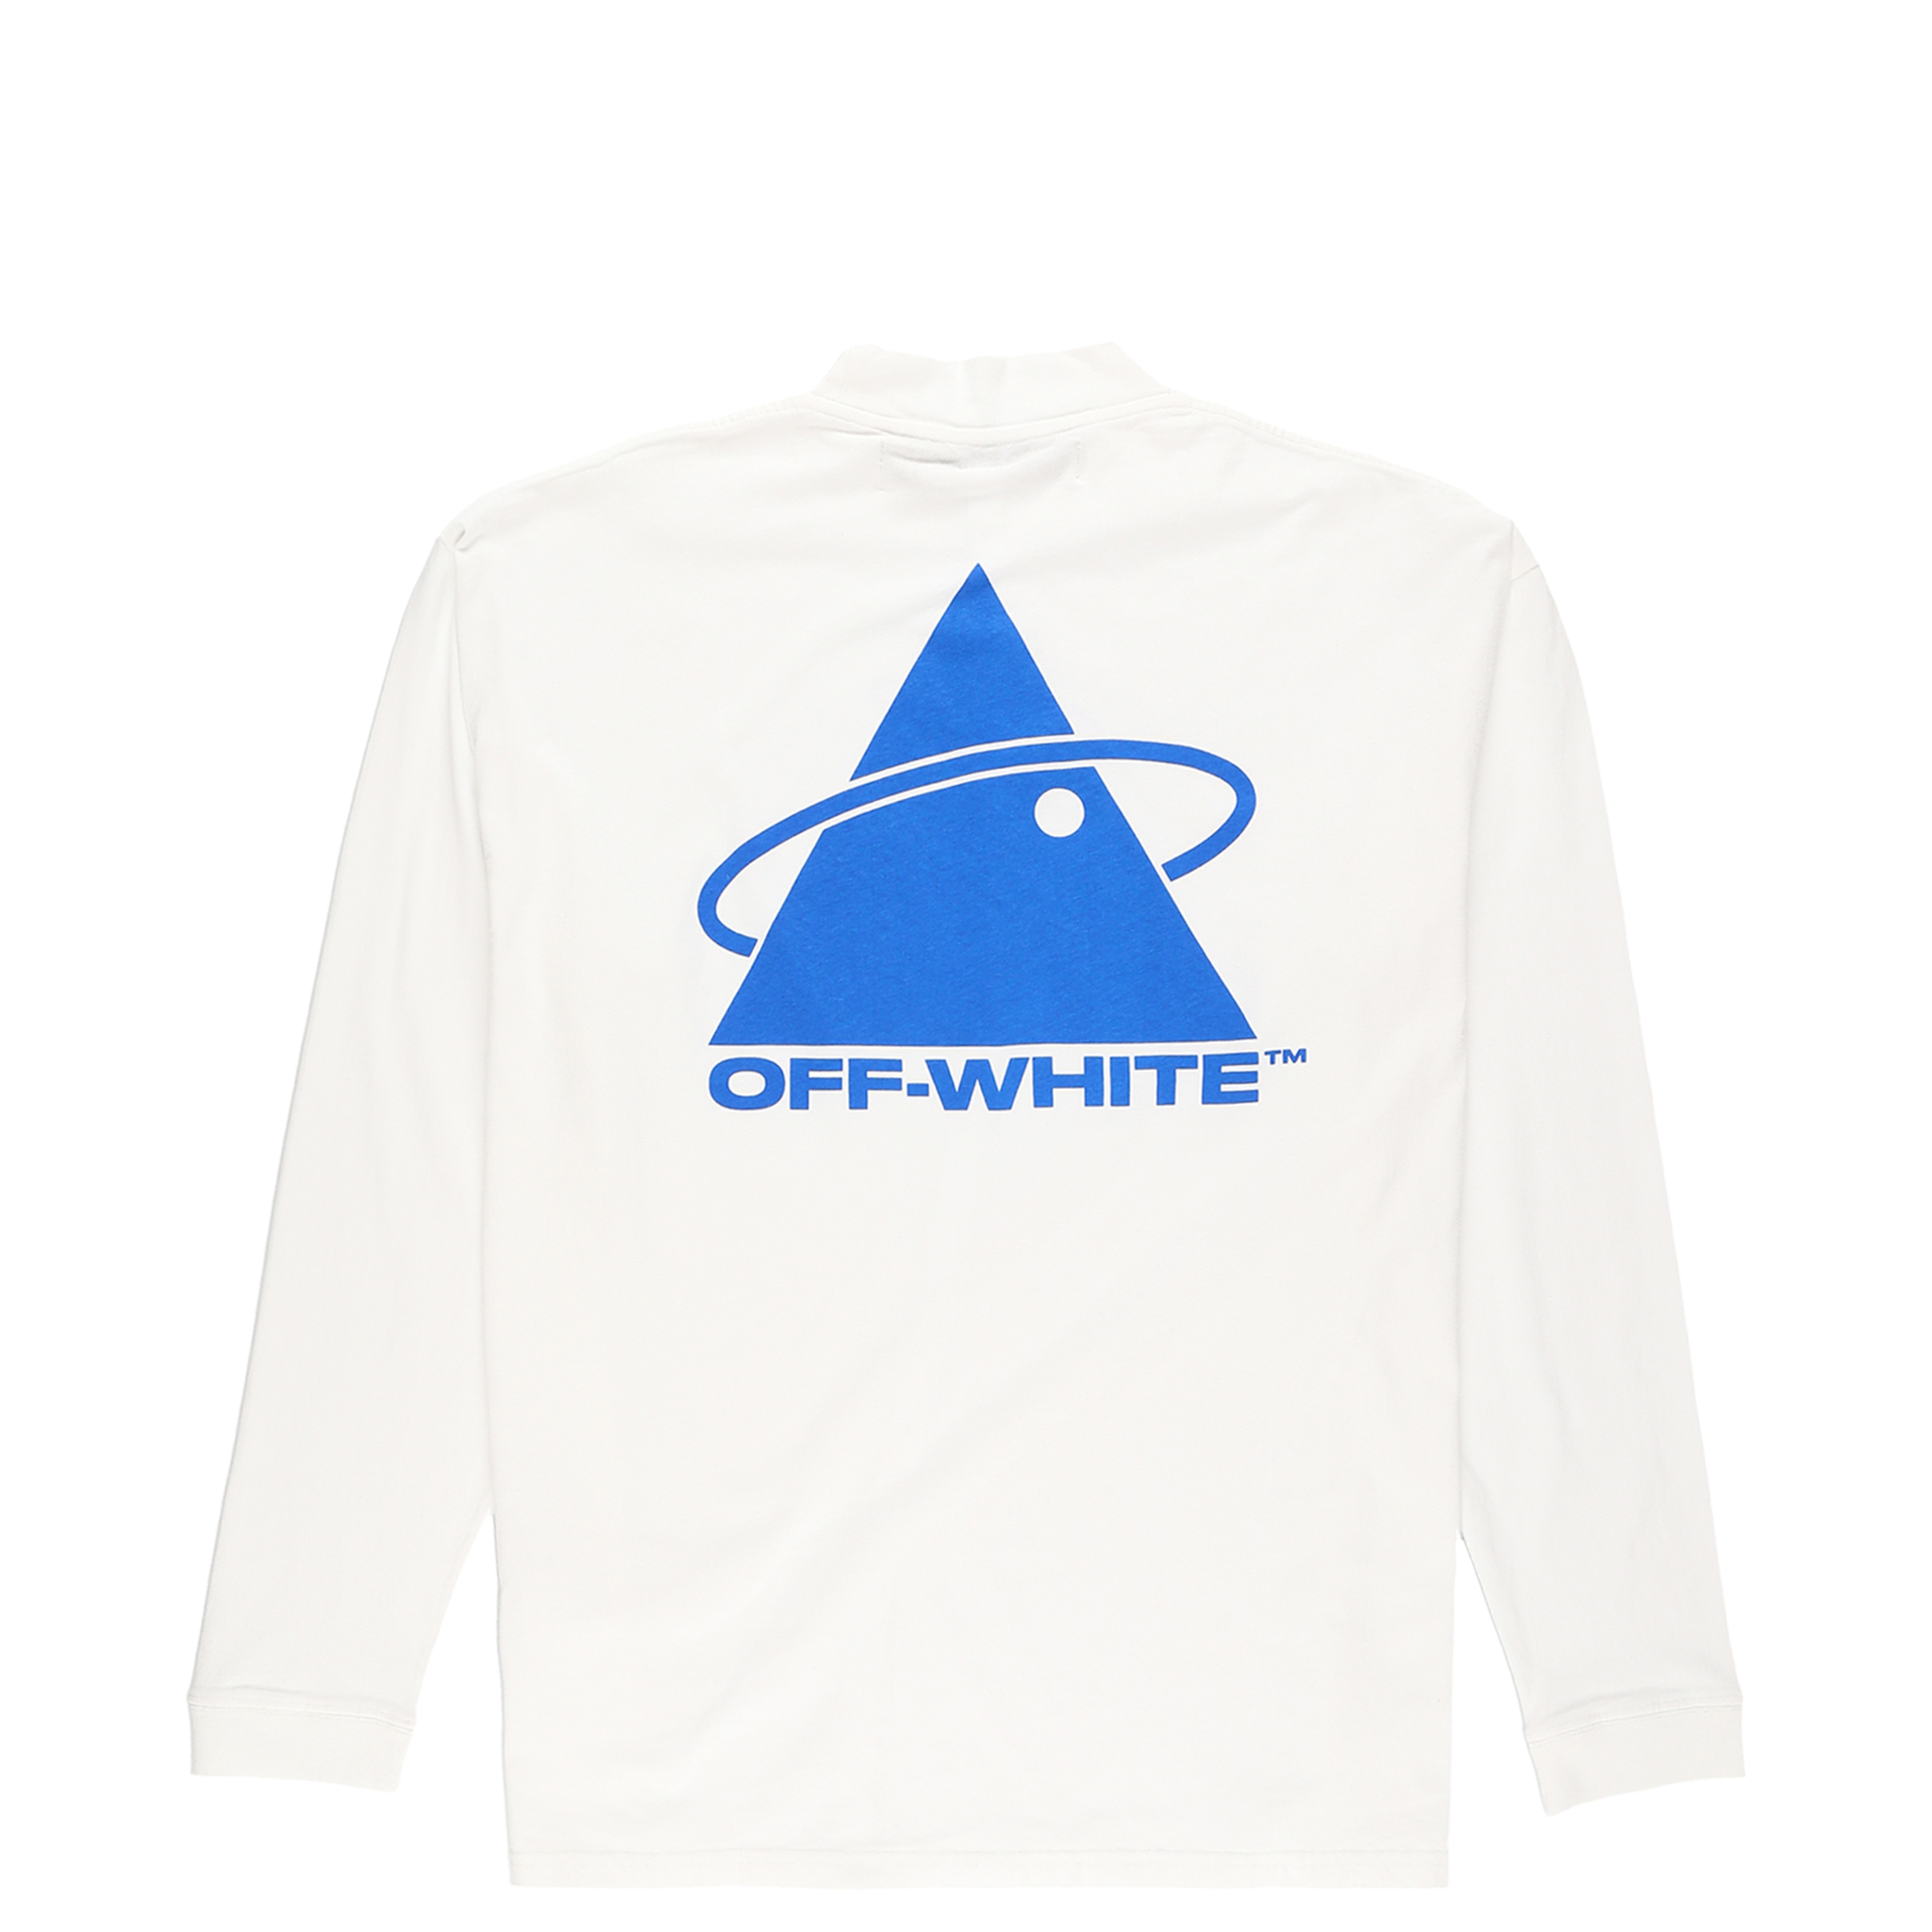 OFF-WHITE Triangle Planet Long Sleeve T-Shirt White/Blue